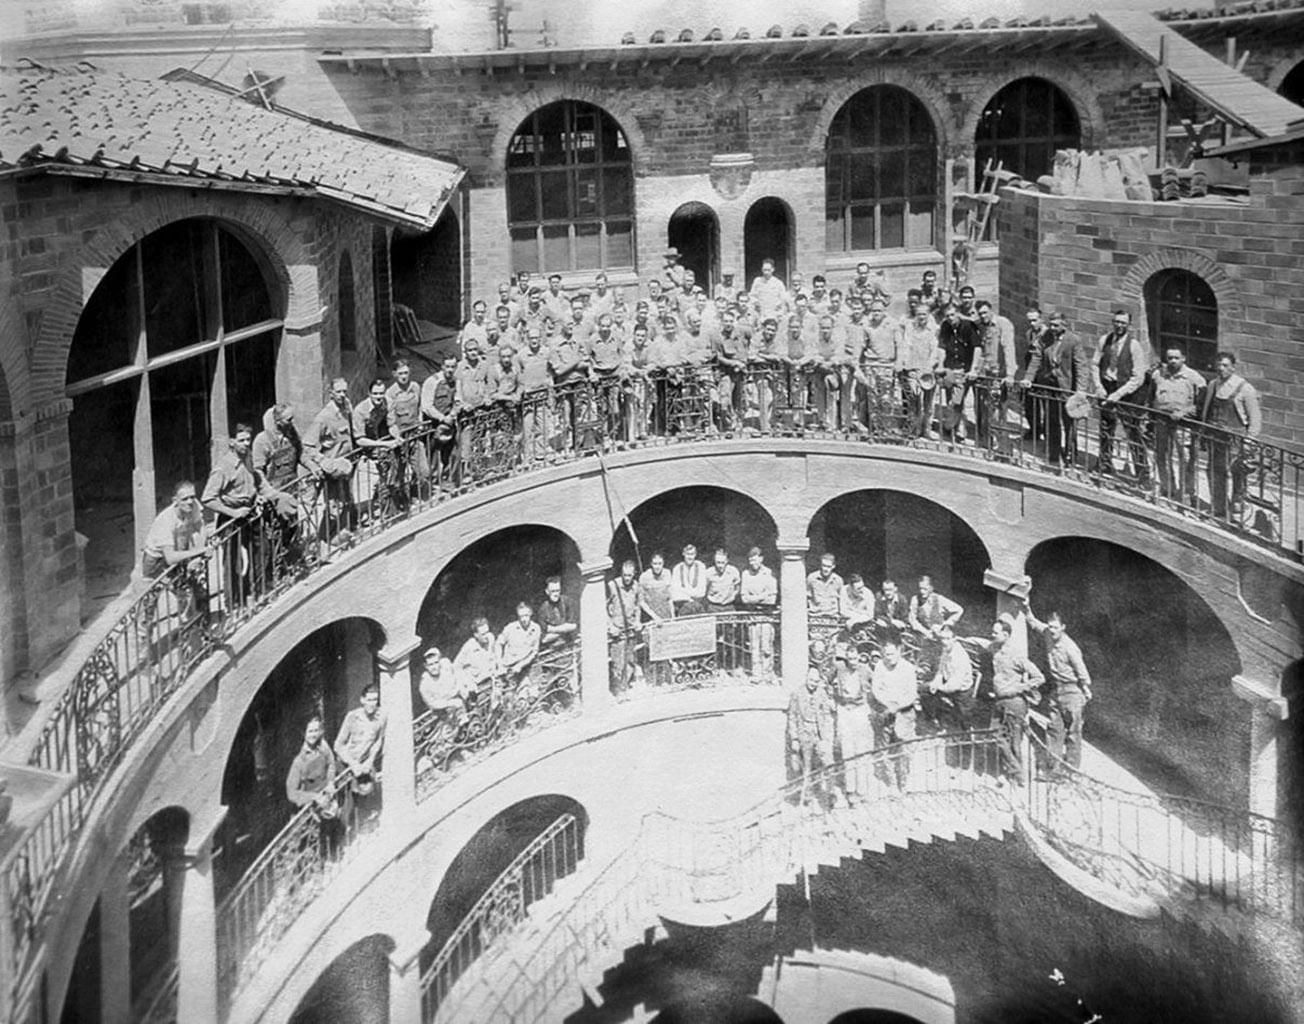 large group of men standing on exterior balcony and stairs of Mi